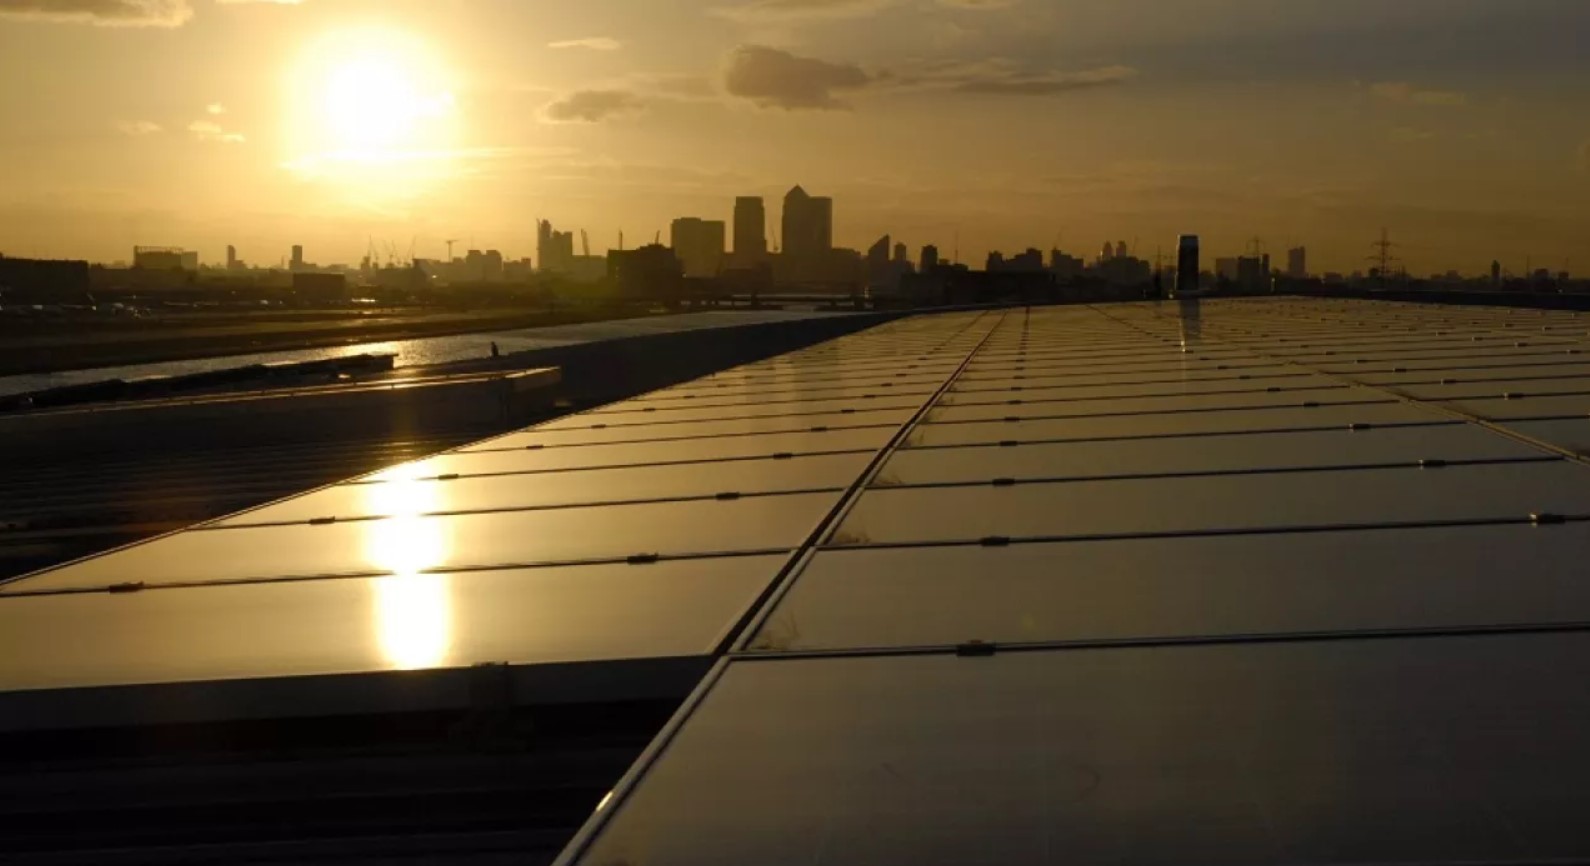 Solar panels on the roof of University of East London building